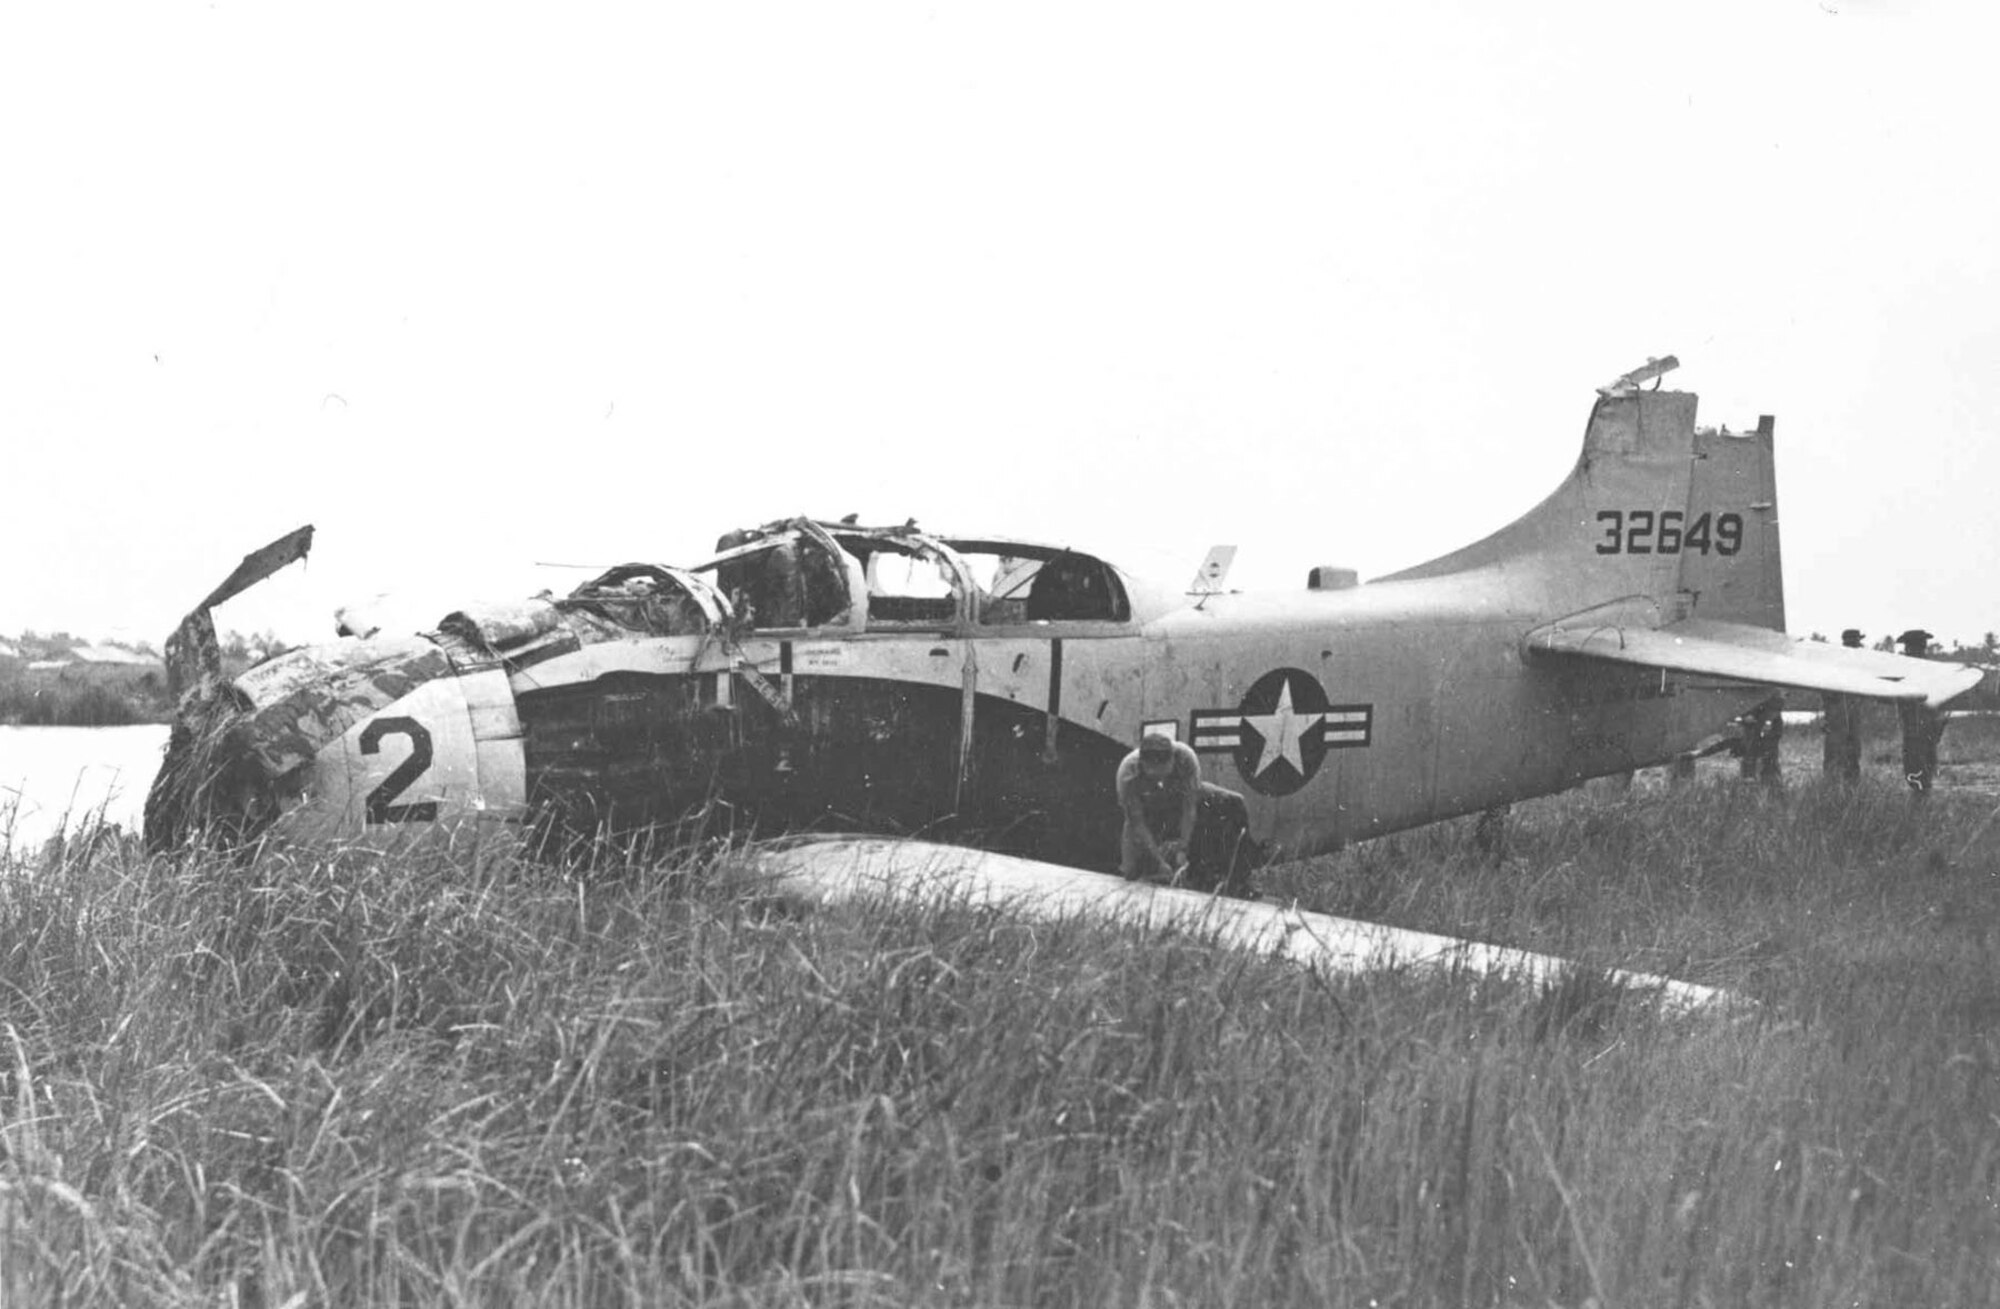 This Douglas A-1E was severely damaged in combat in South Vietnam. It is the aircraft that was flown by Maj. Bernard Fisher on March 10, 1966, when he rescued a fellow pilot shot down over South Vietnam, an act for which he was awarded the Medal of Honor. The A-1E flown by Fisher on his mission was restored and is on display at the National Museum of the U.S. Air Force, Dayton, Ohio. (U.S. Air Force Photo)(Released)